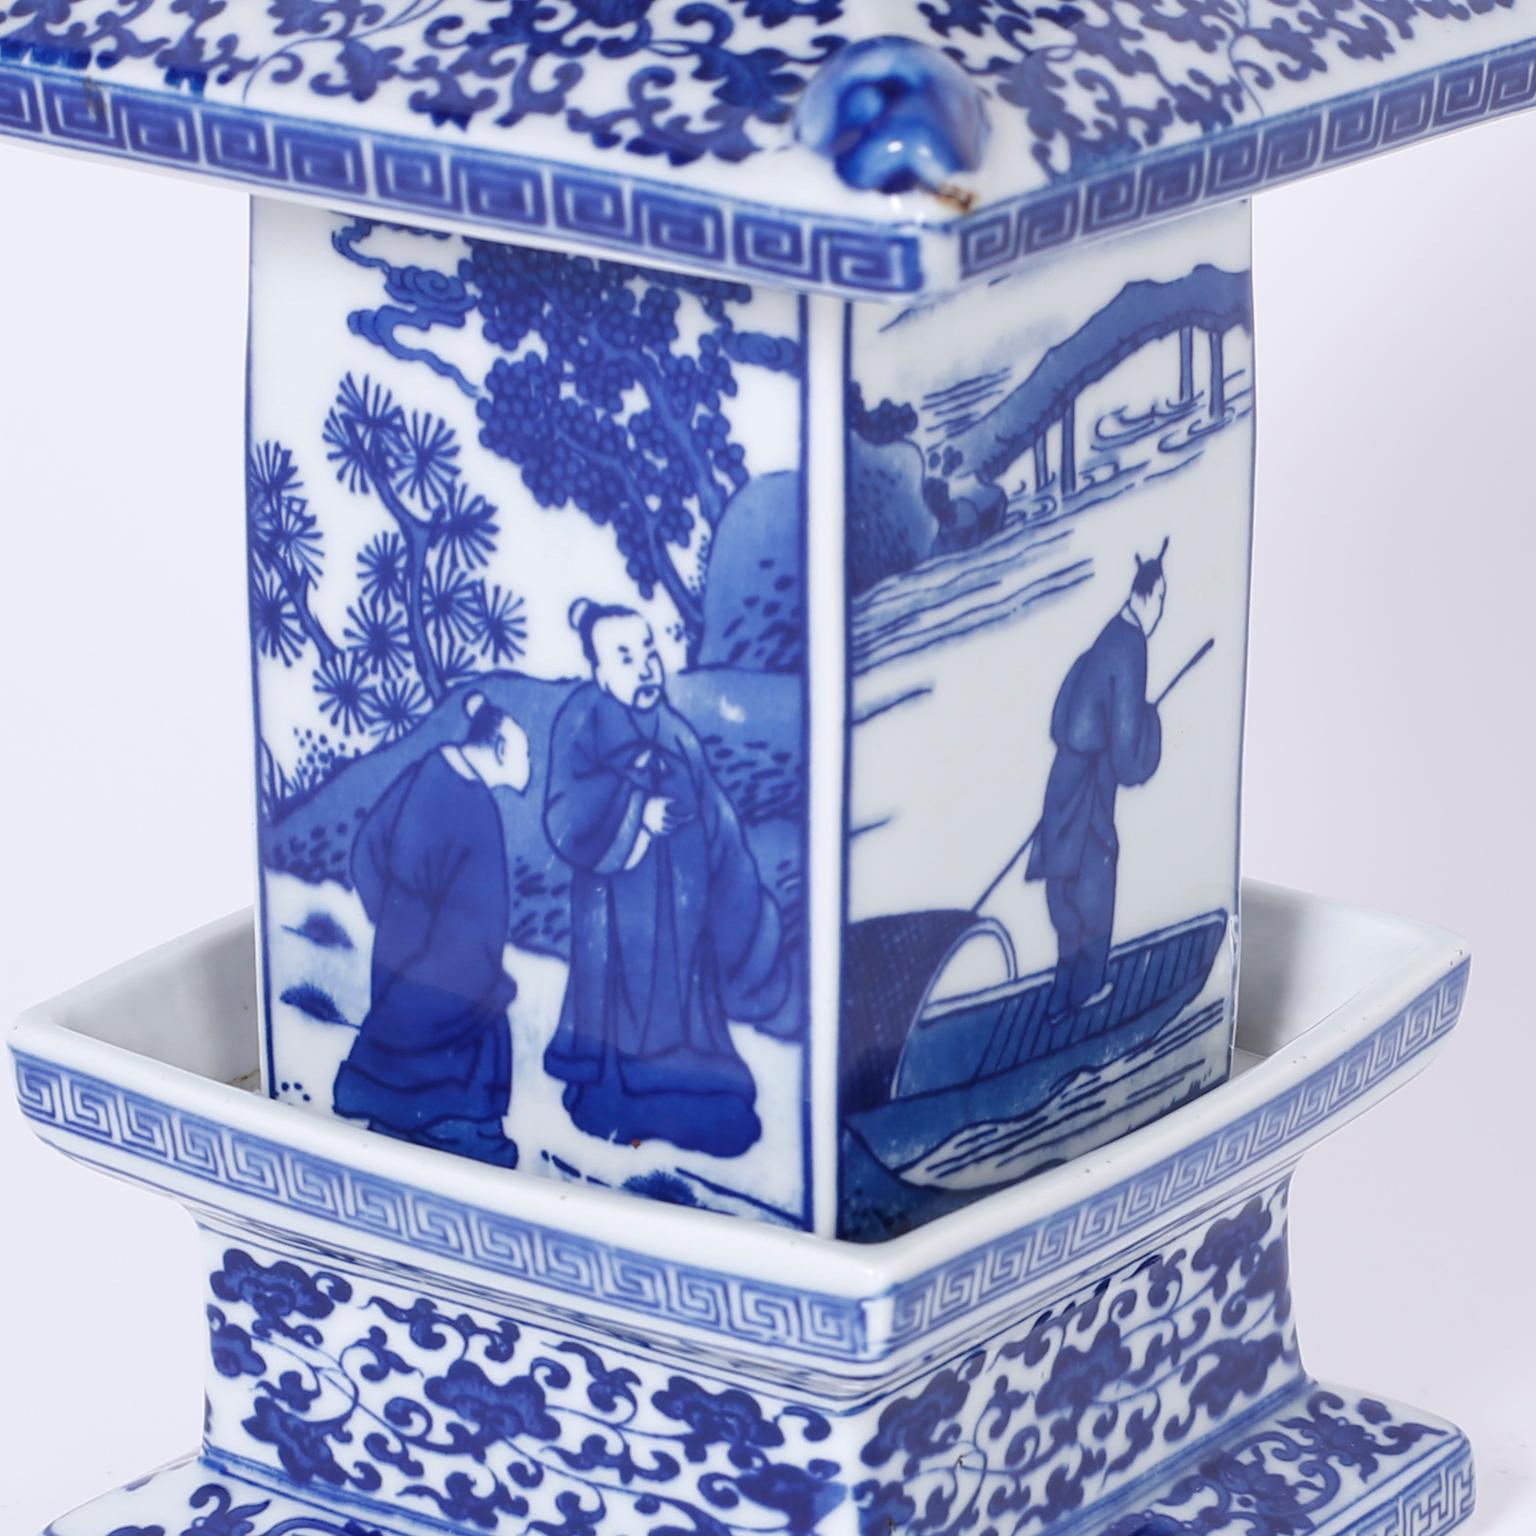 Contemporary Pair of Blue and White Chinese Porcelain Pagoda Jars or Urns